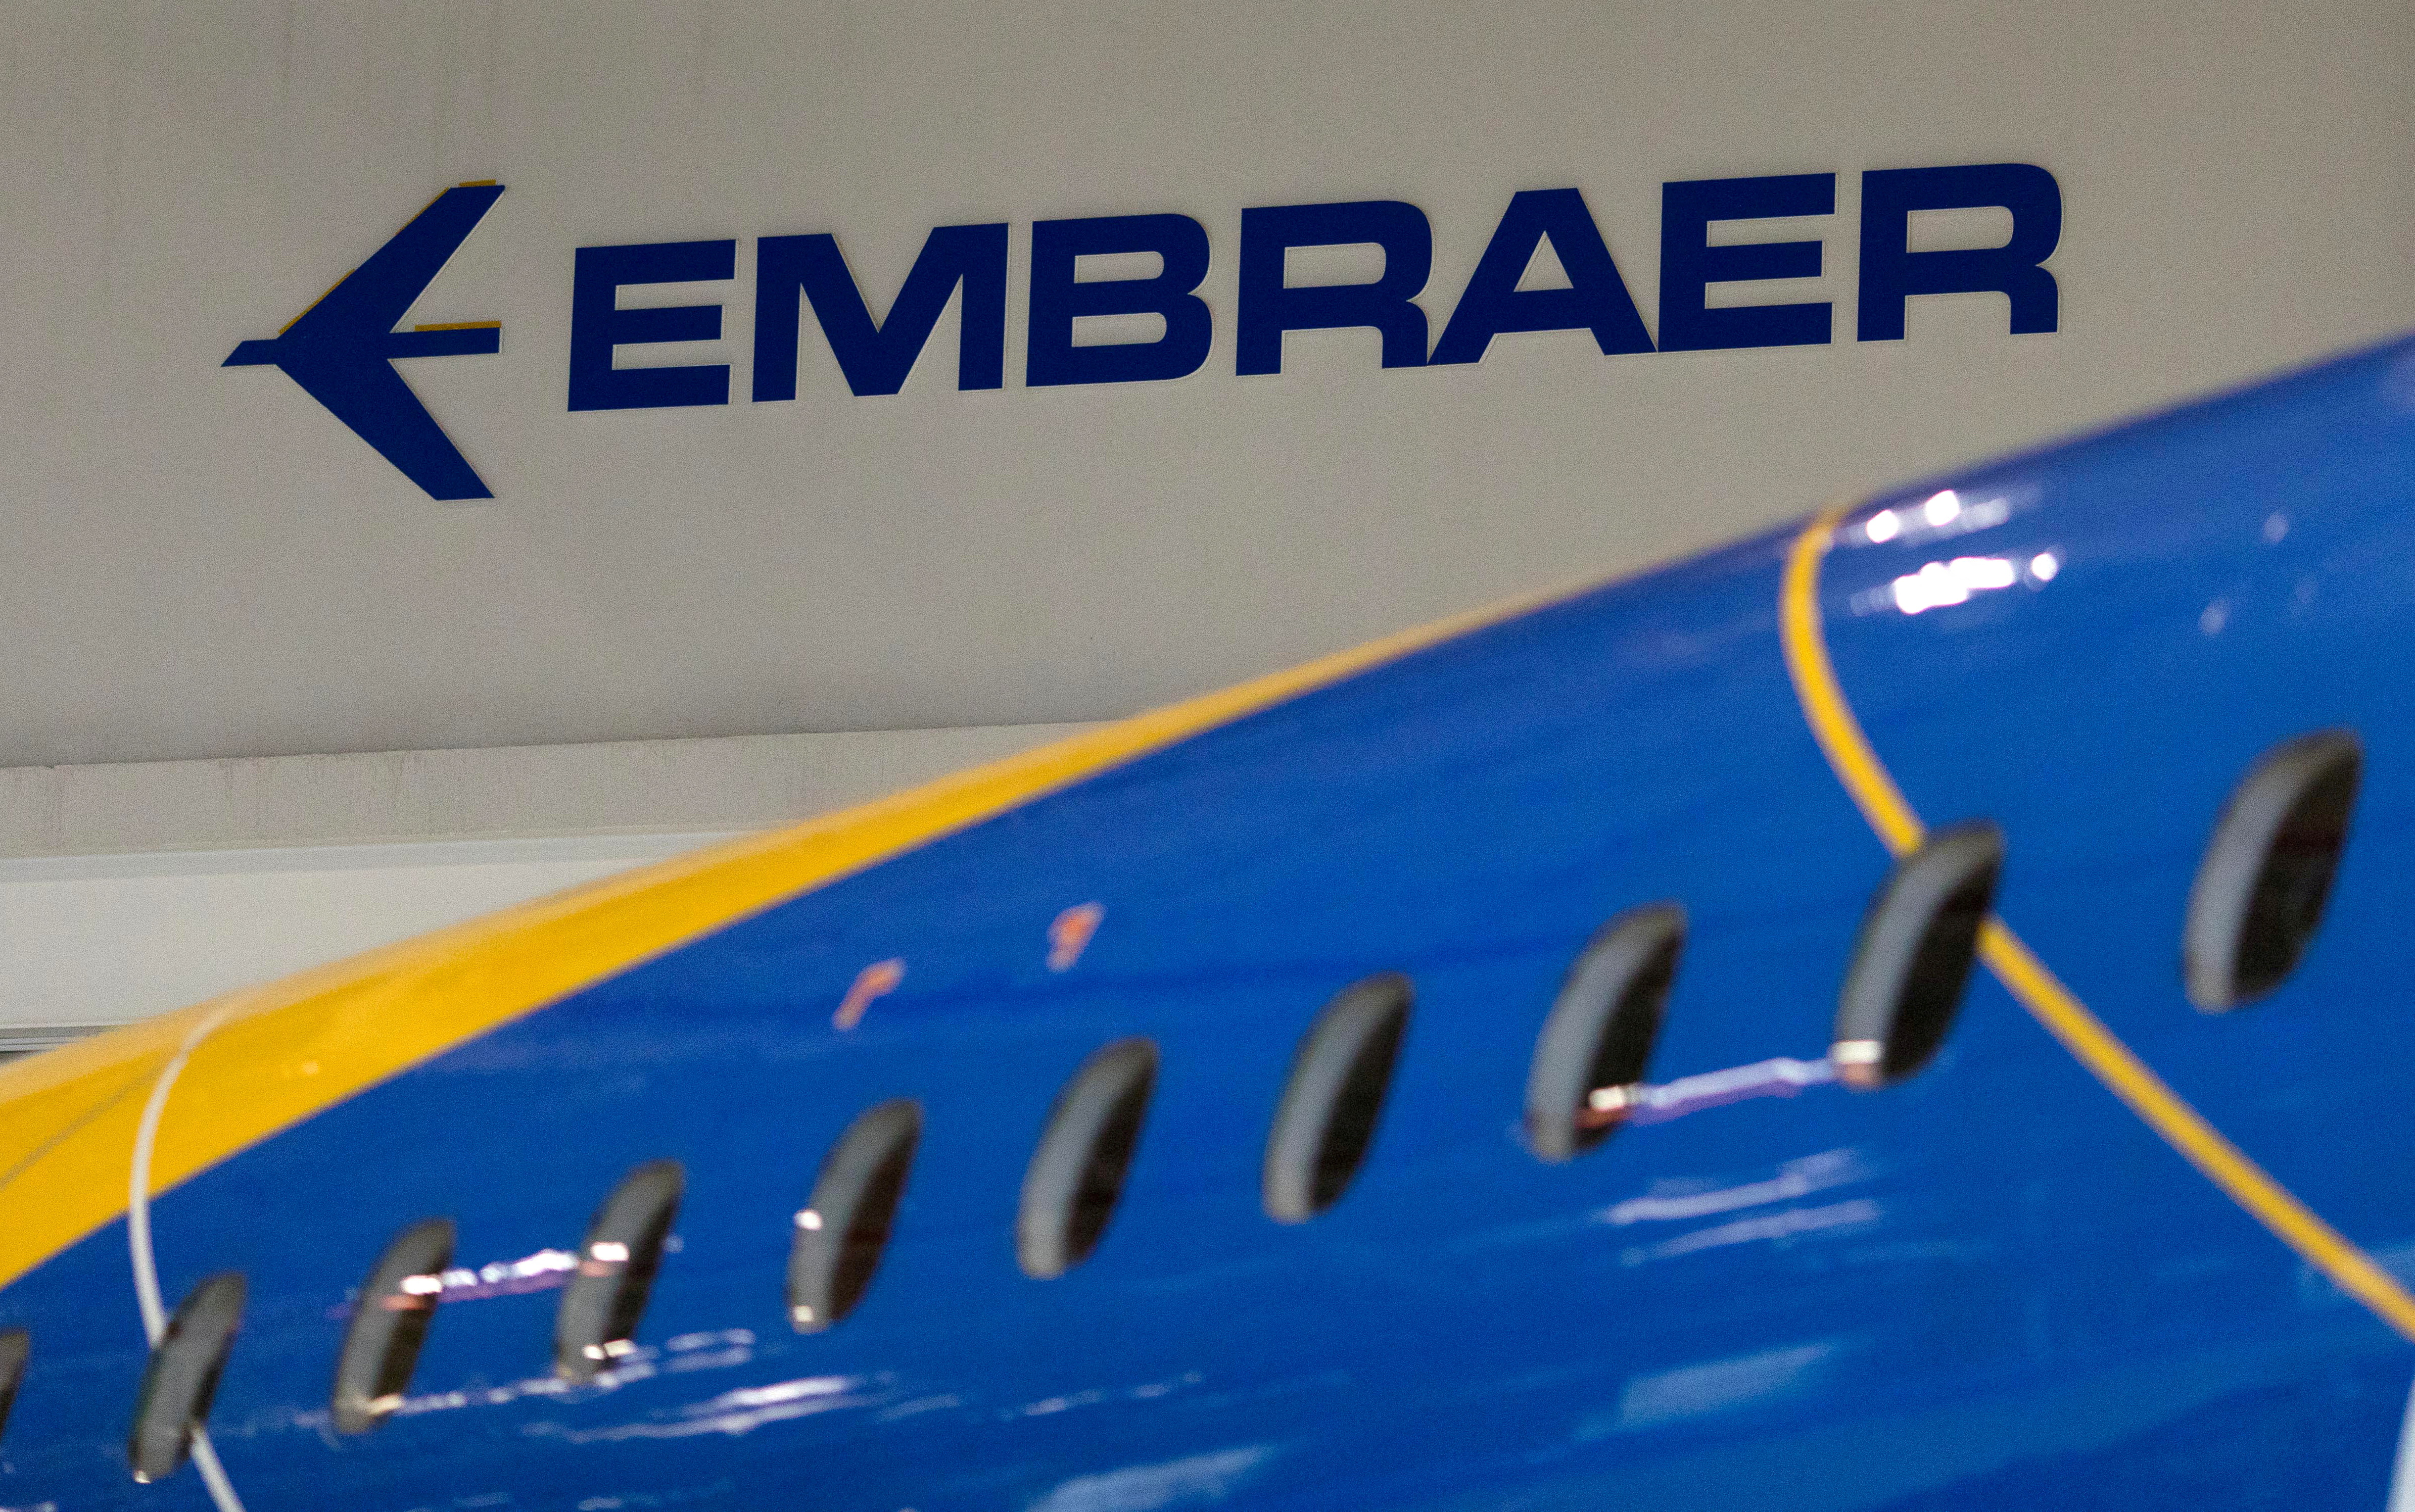 The logo of Brazilian planemaker Embraer SA is seen at the company's headquarters in Sao Jose dos Campos